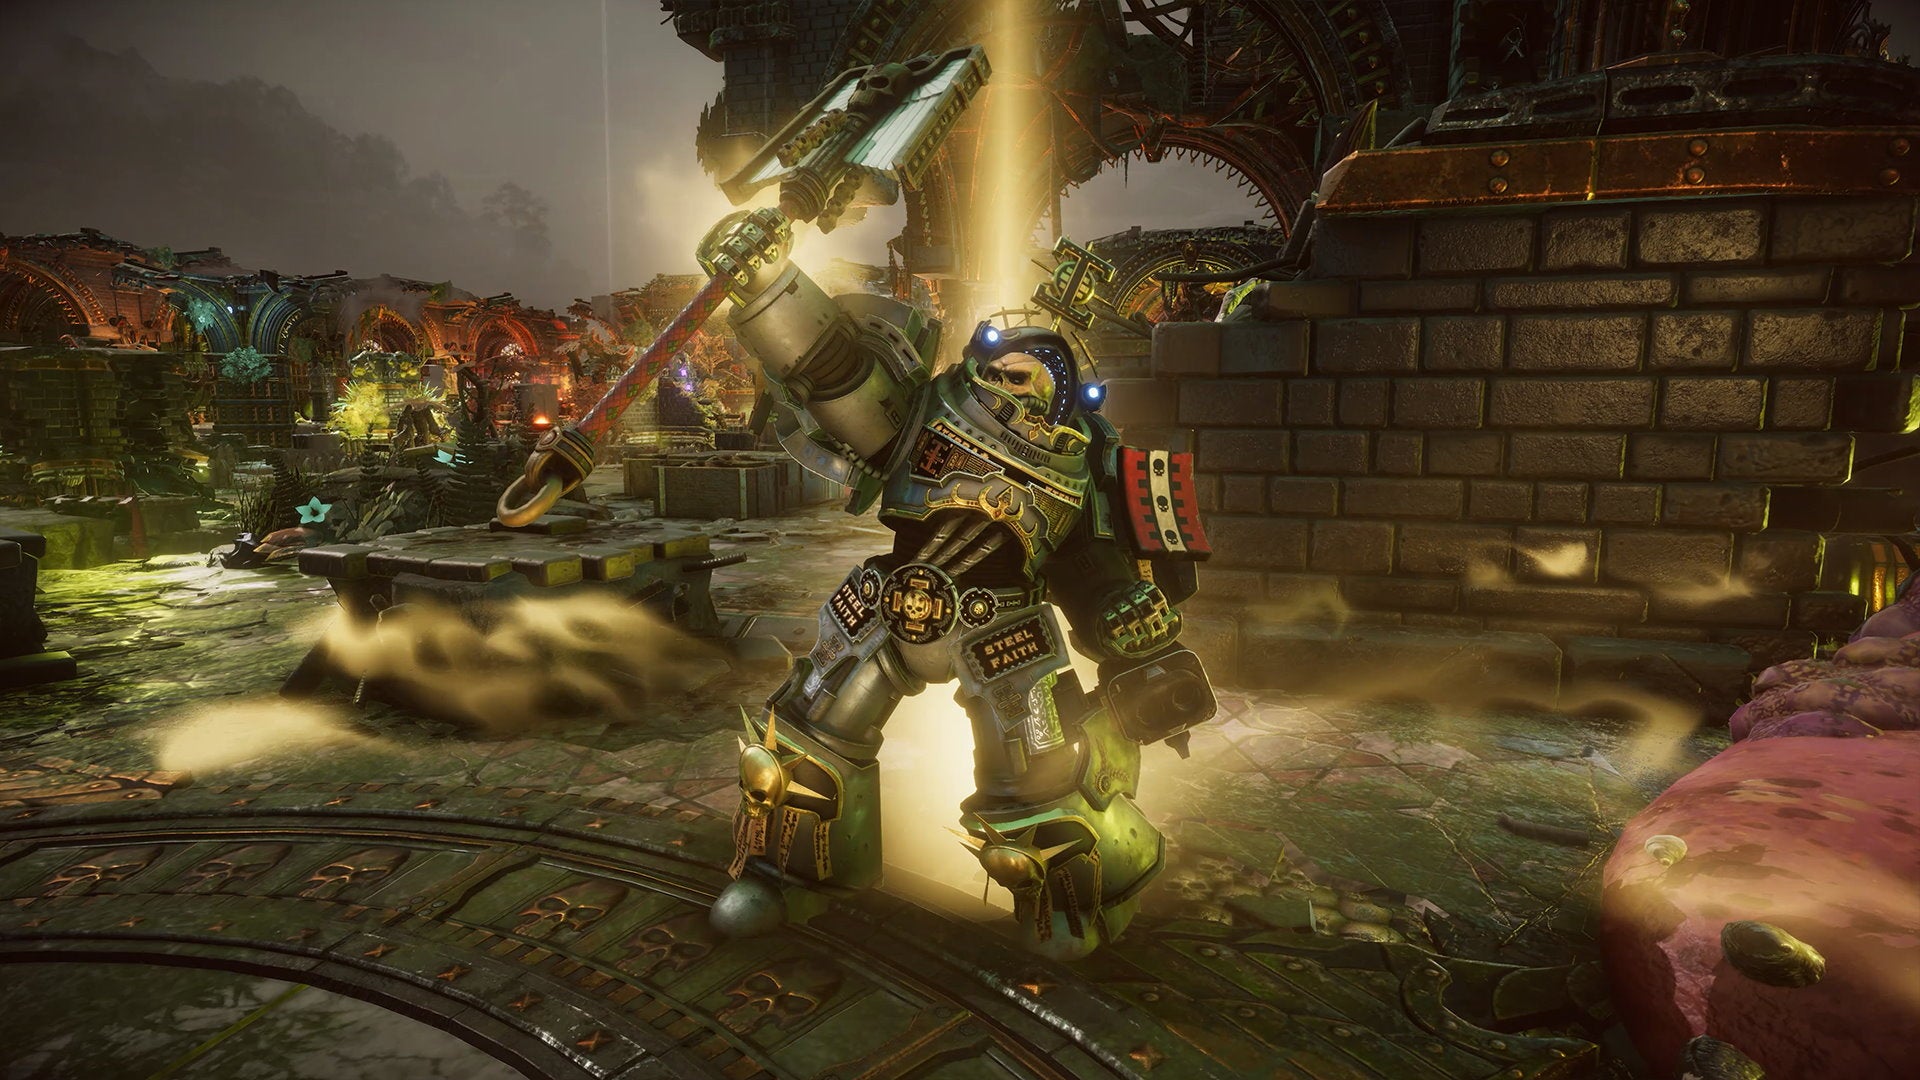 A Knight with a skull for a head raises a large axe in Warhammer 40K: Chaos Gate - Daemonhunters